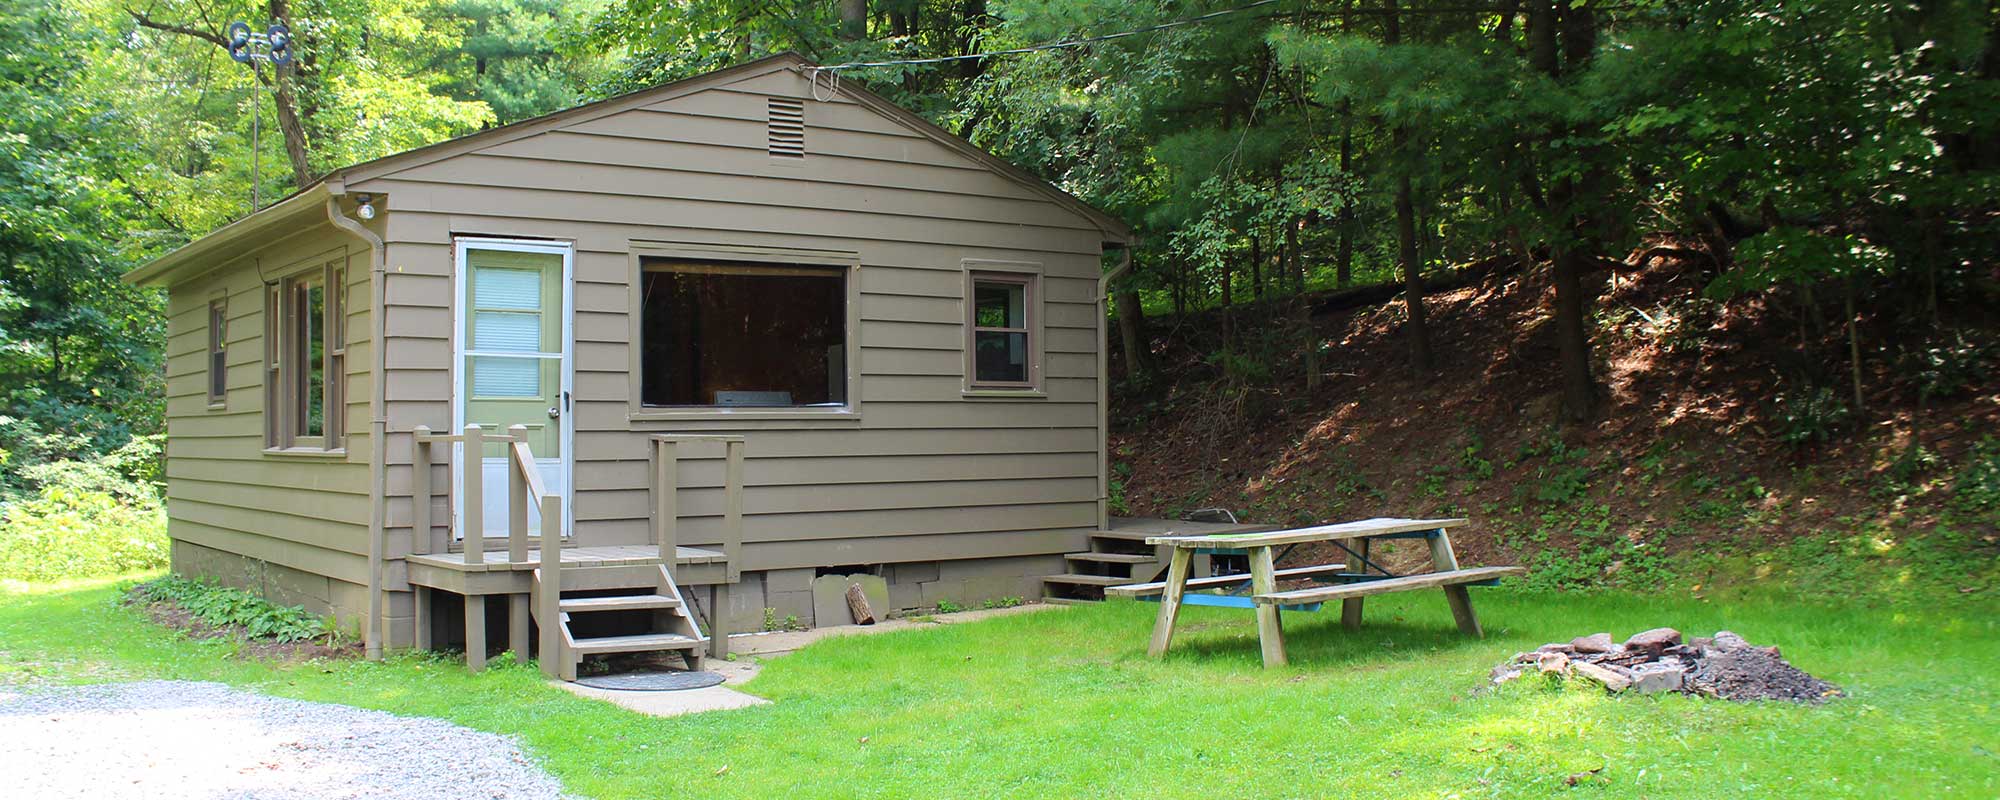 Cozy Ohio Rental Cabins Remote Fishing Cabins Family Fun Cottages Located By The Lake And Hiking Trails